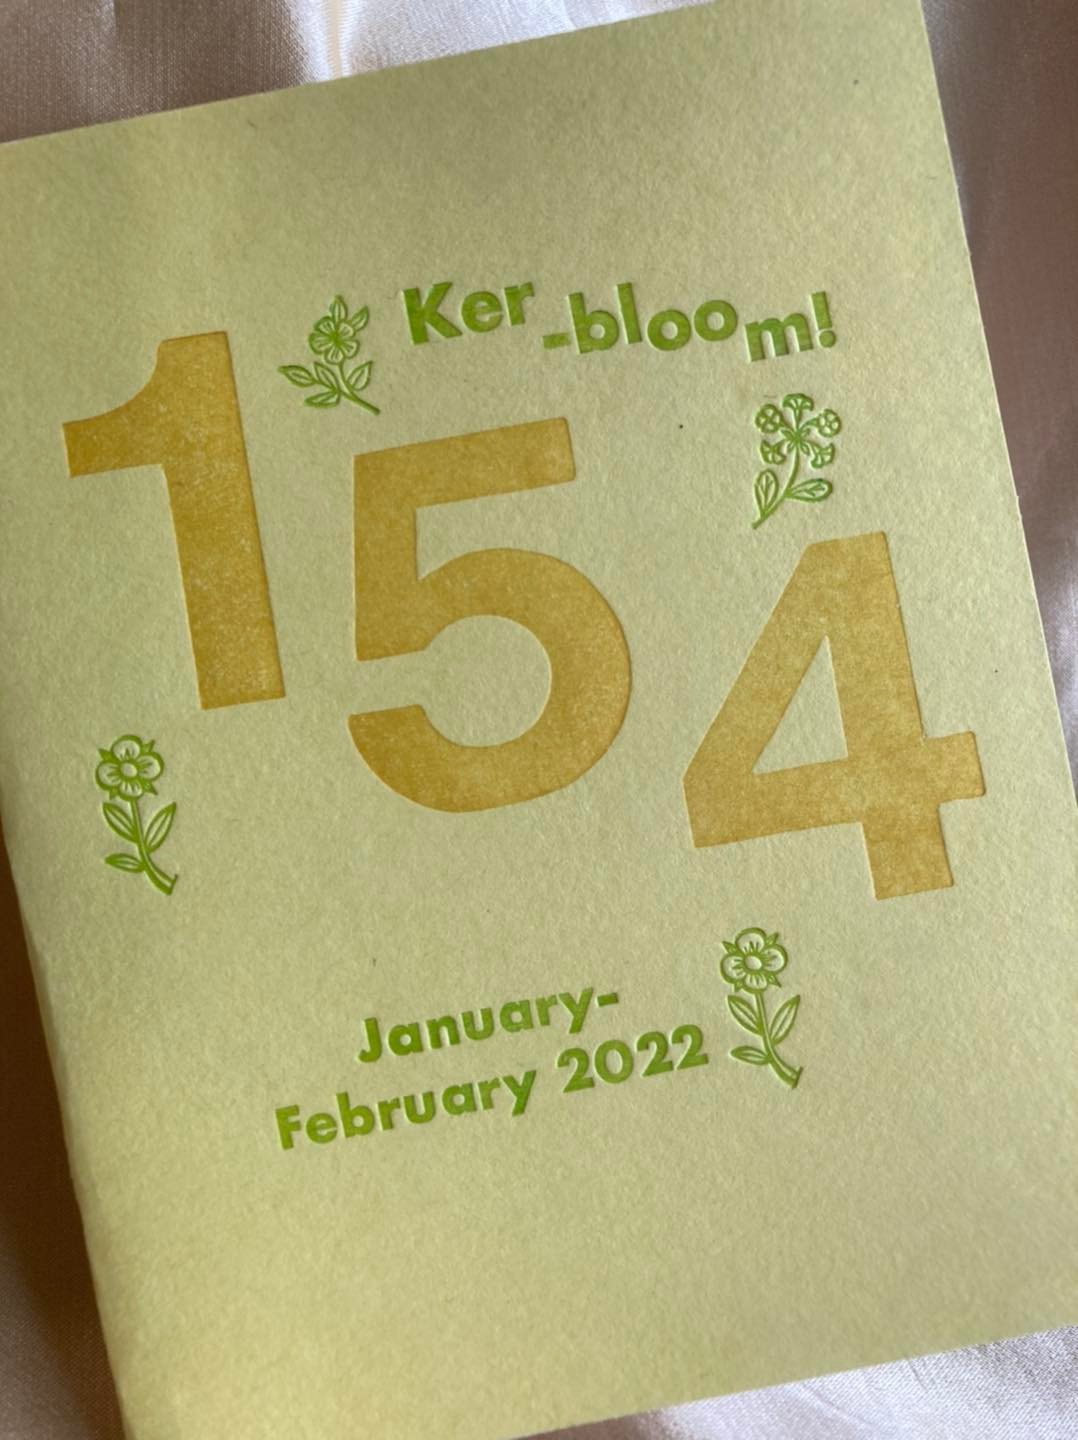 photo of zine: light yellow cardstock background, letterpress title in green around a giant "154" in gold